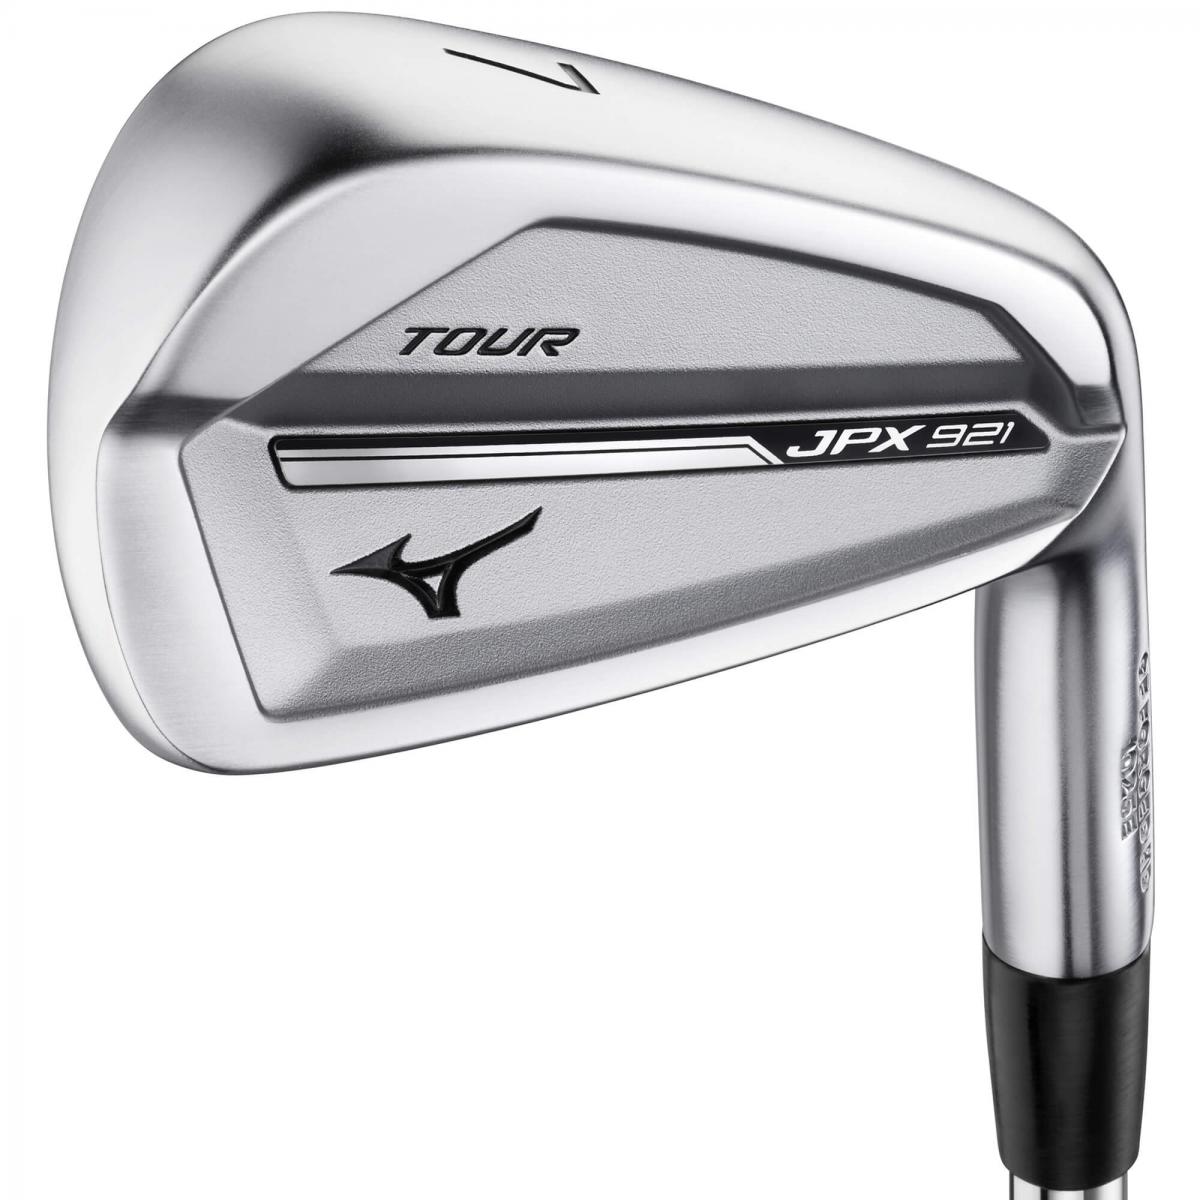 Our favourite Mizuno irons that have EVER been produced